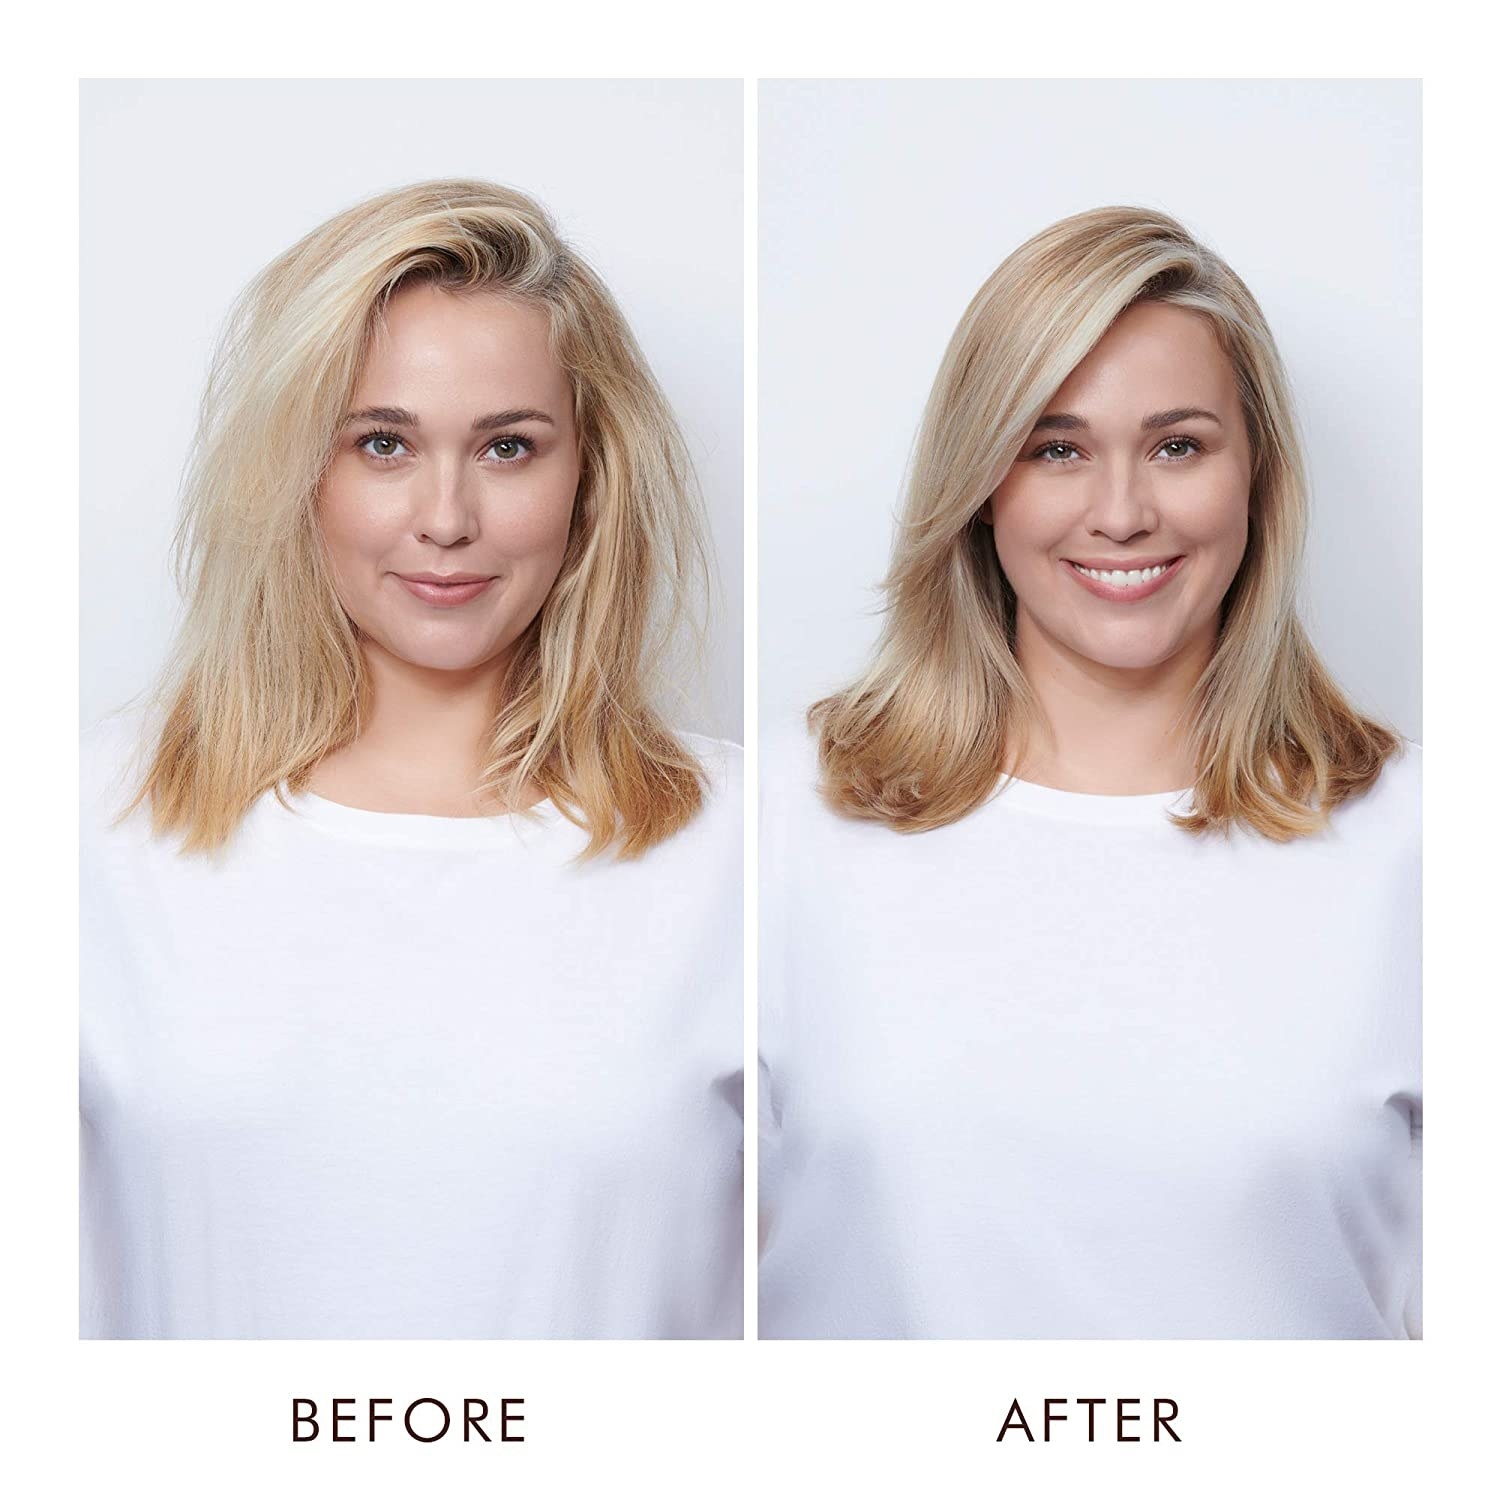 Model before and after using product, before photo shows frizzy hair, after photo shows smooth, tame hair